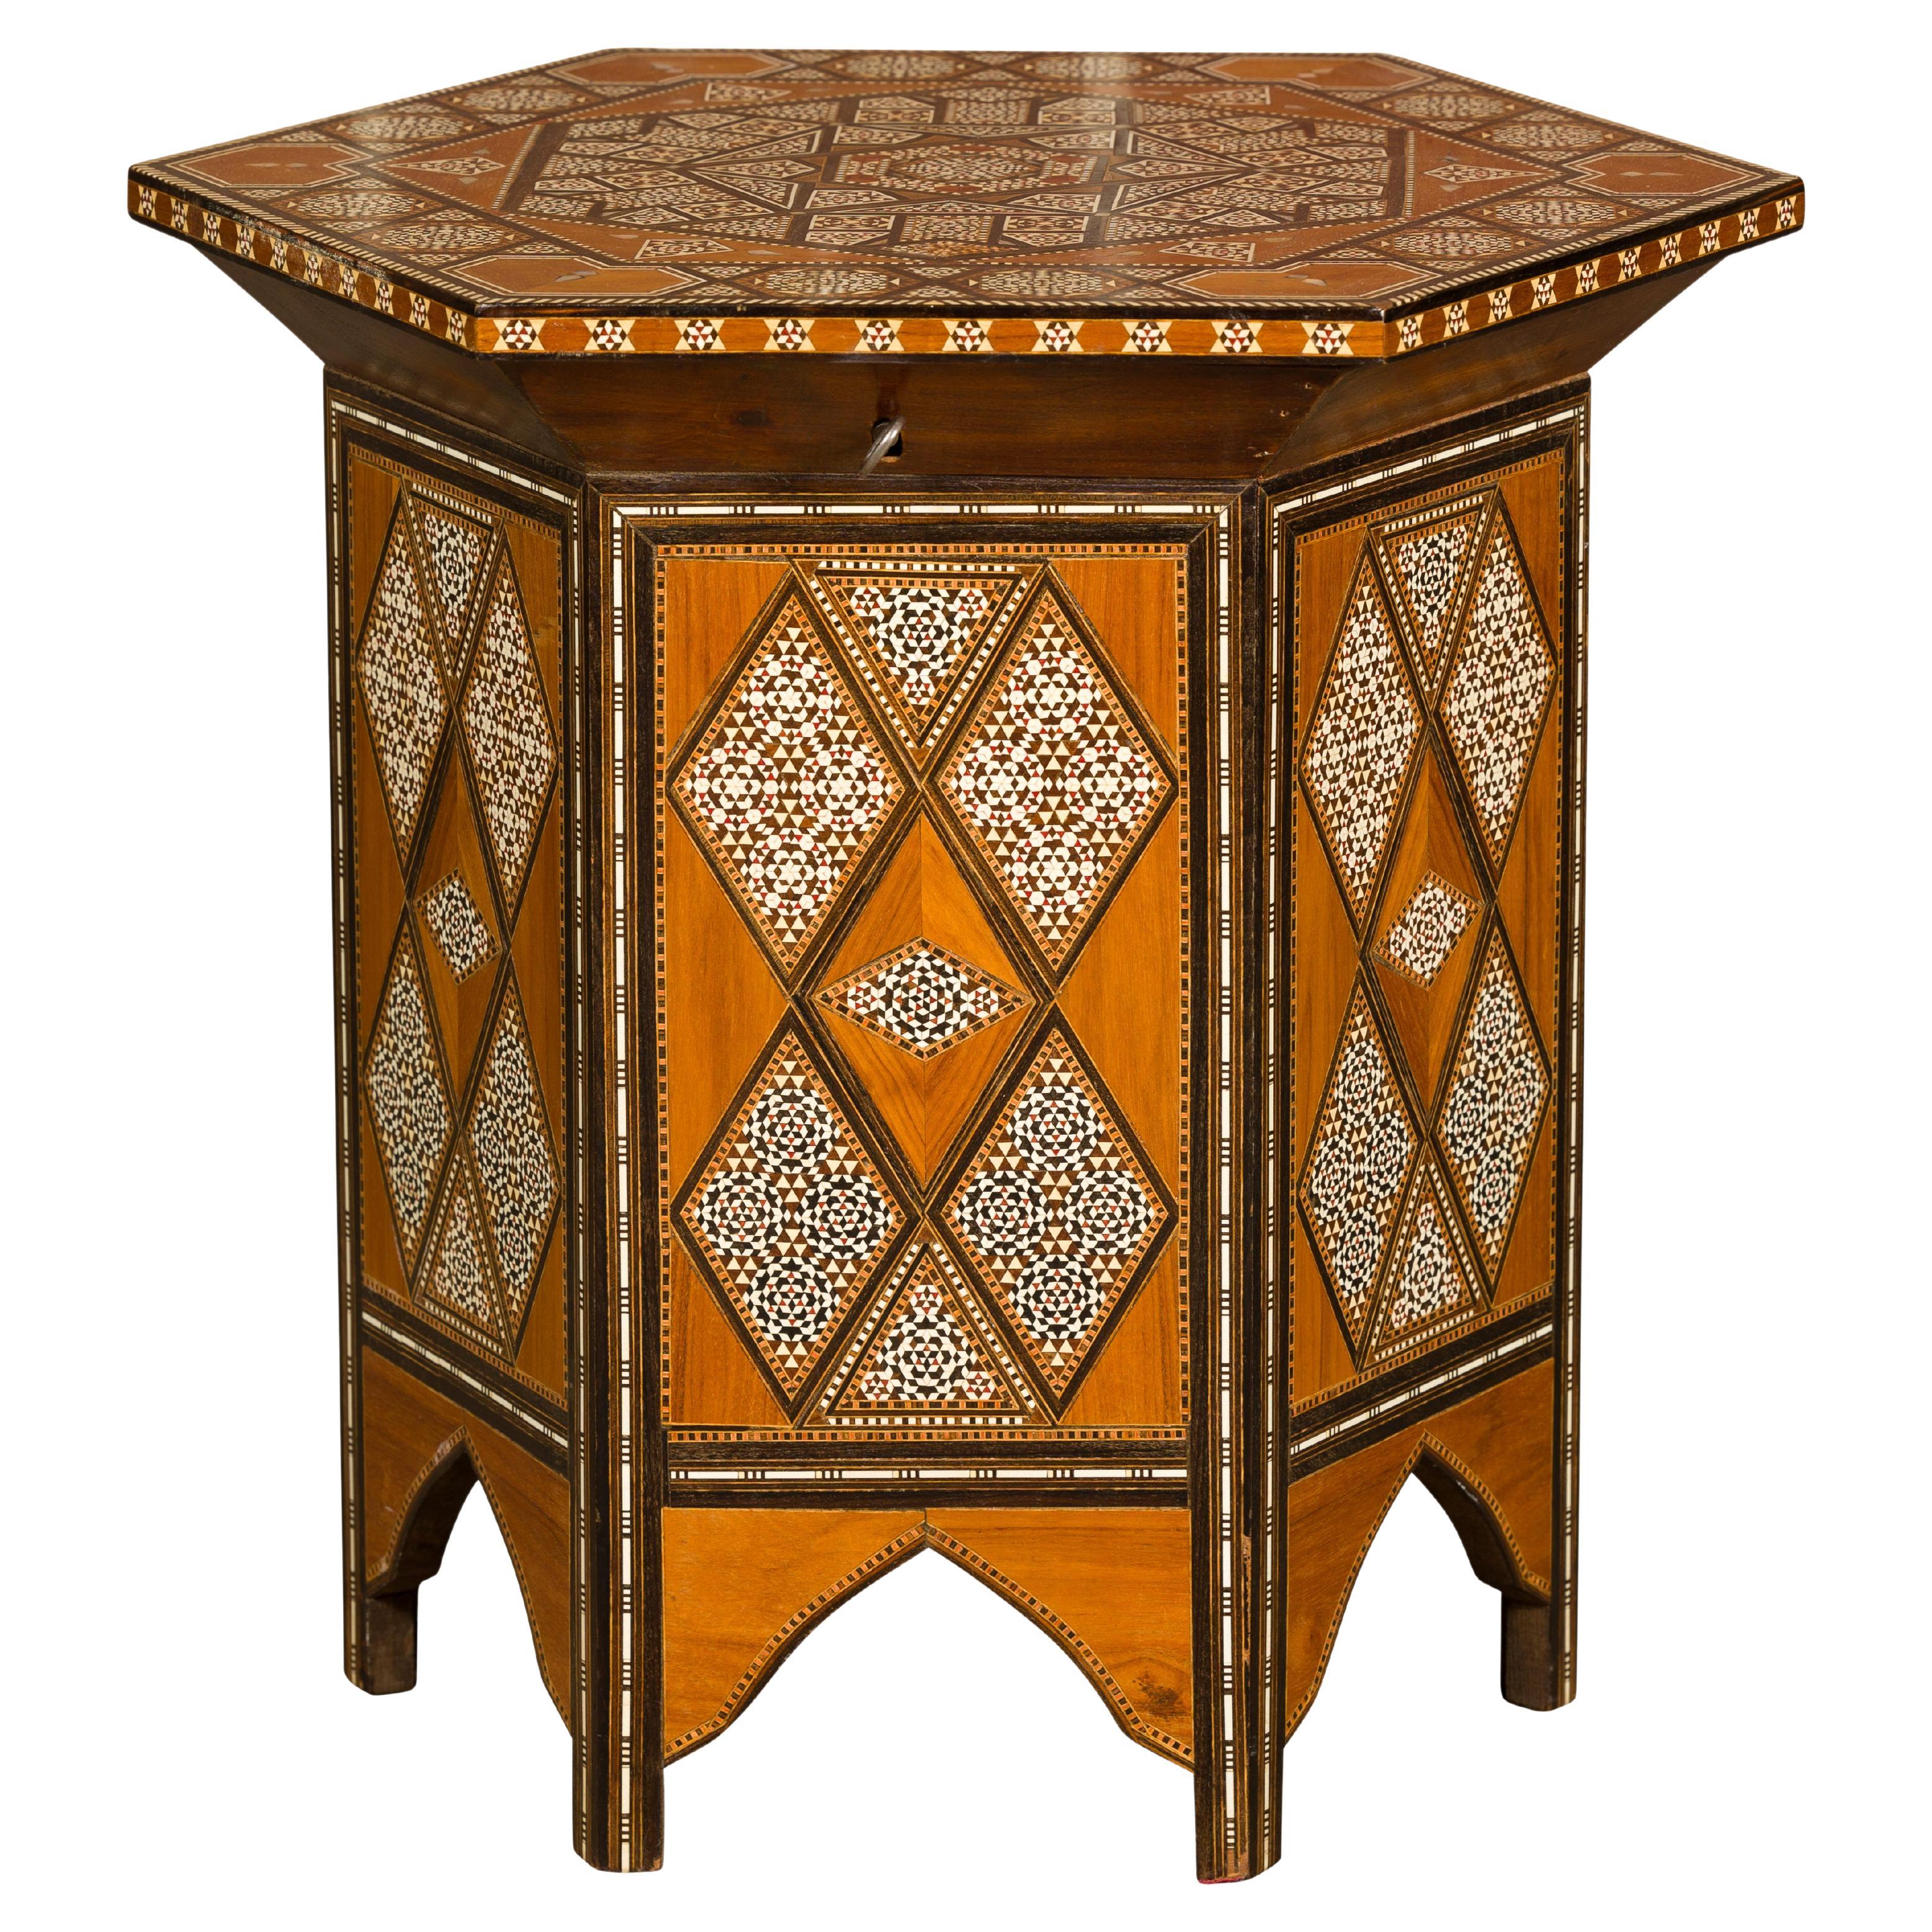 A Moorish Style 1920s Moroccan Drinks Table with Bone Inlay and Lift Top For Sale